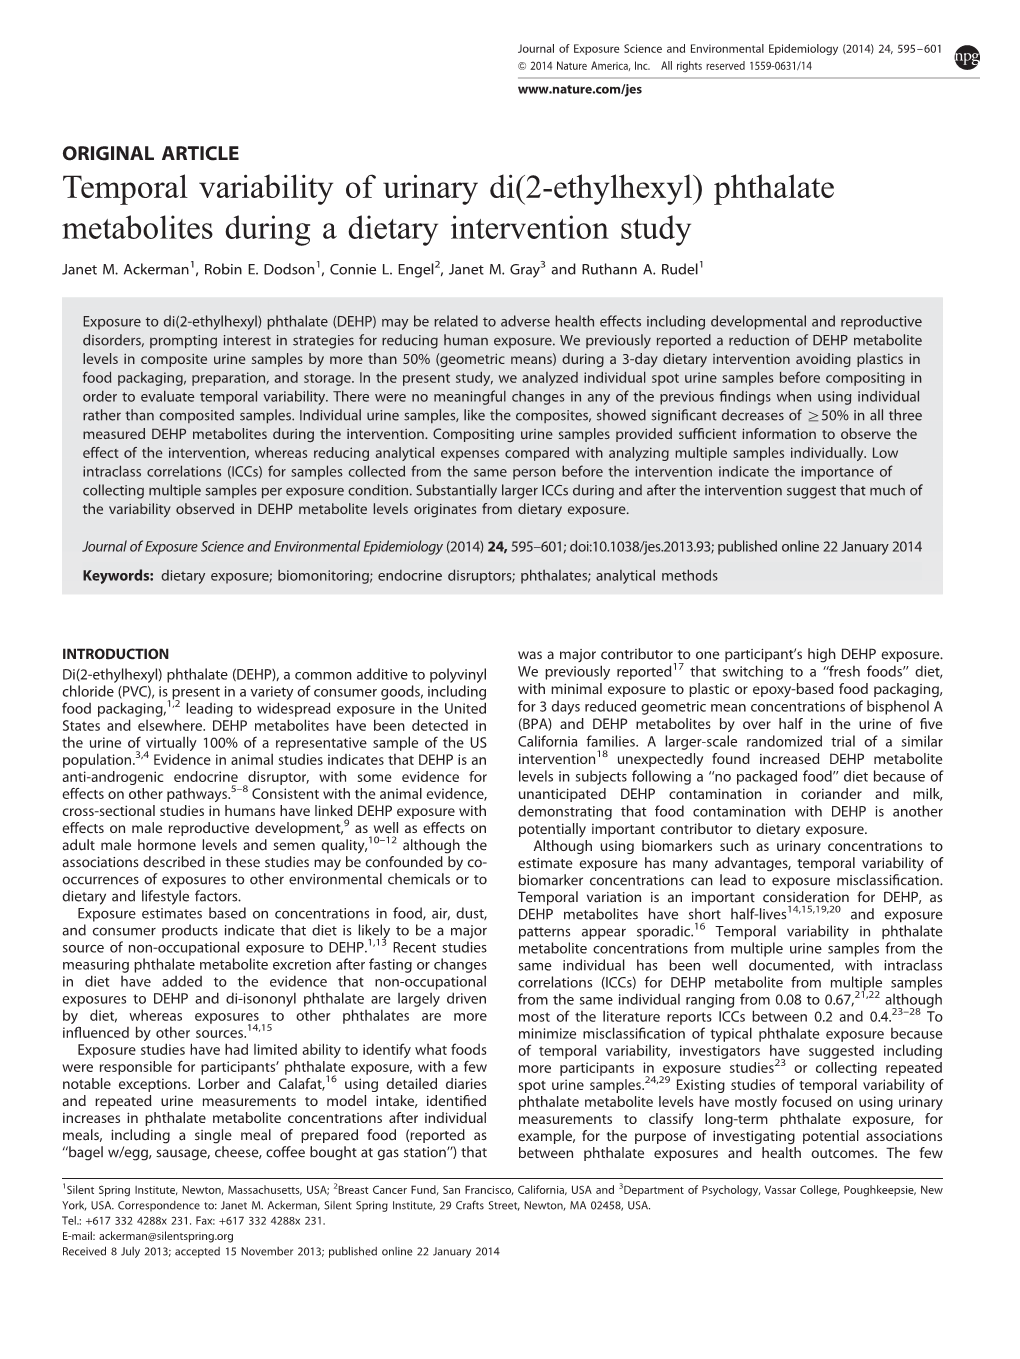 Temporal Variability of Urinary Di(2-Ethylhexyl) Phthalate Metabolites During a Dietary Intervention Study